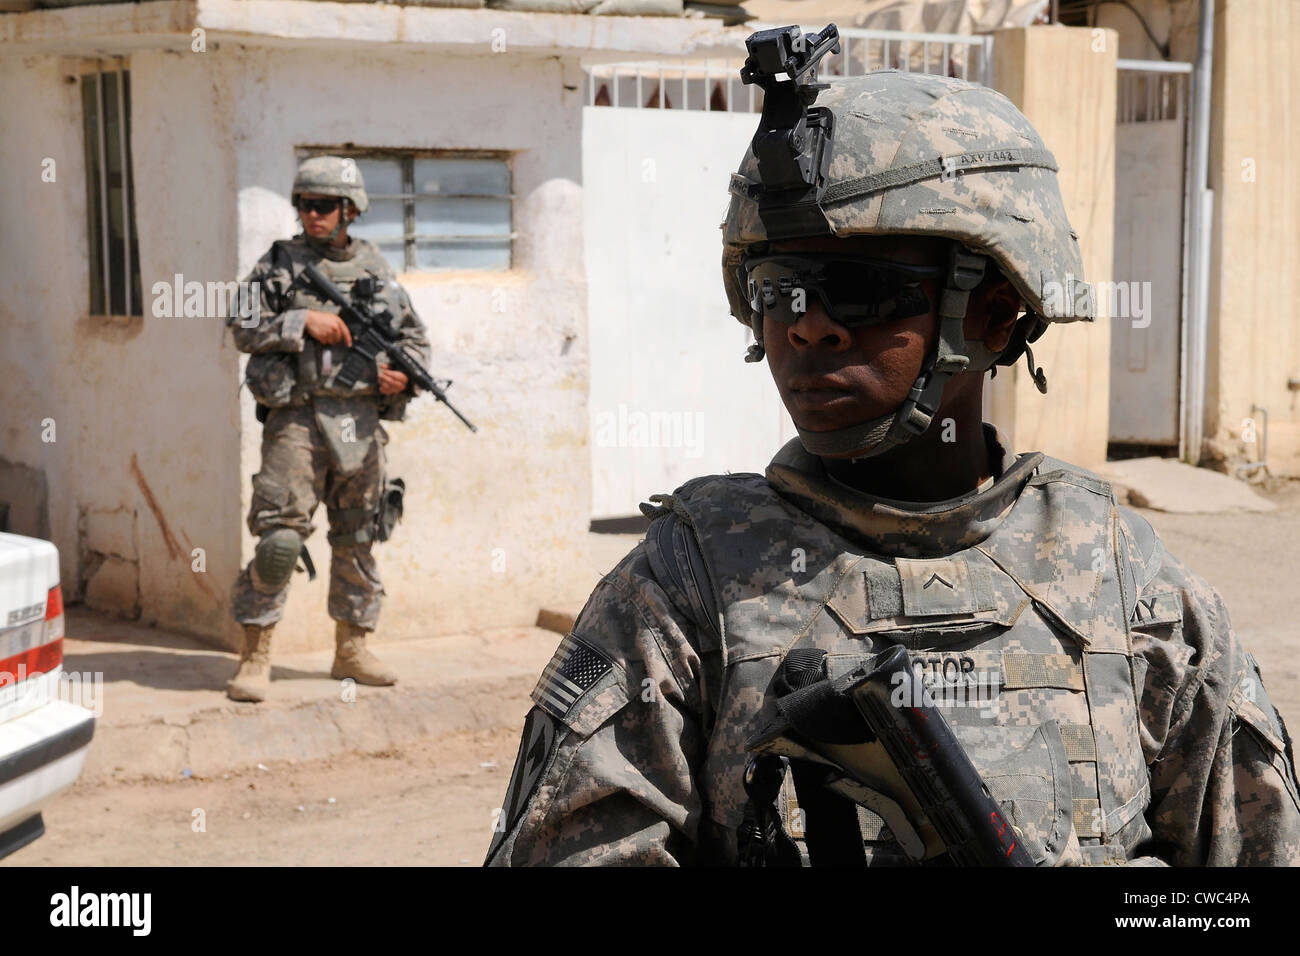 US Army soldiers on patrol in Kirkuk Iraq. May 17 2009. (BSLOC 2011 12 159) Stock Photo